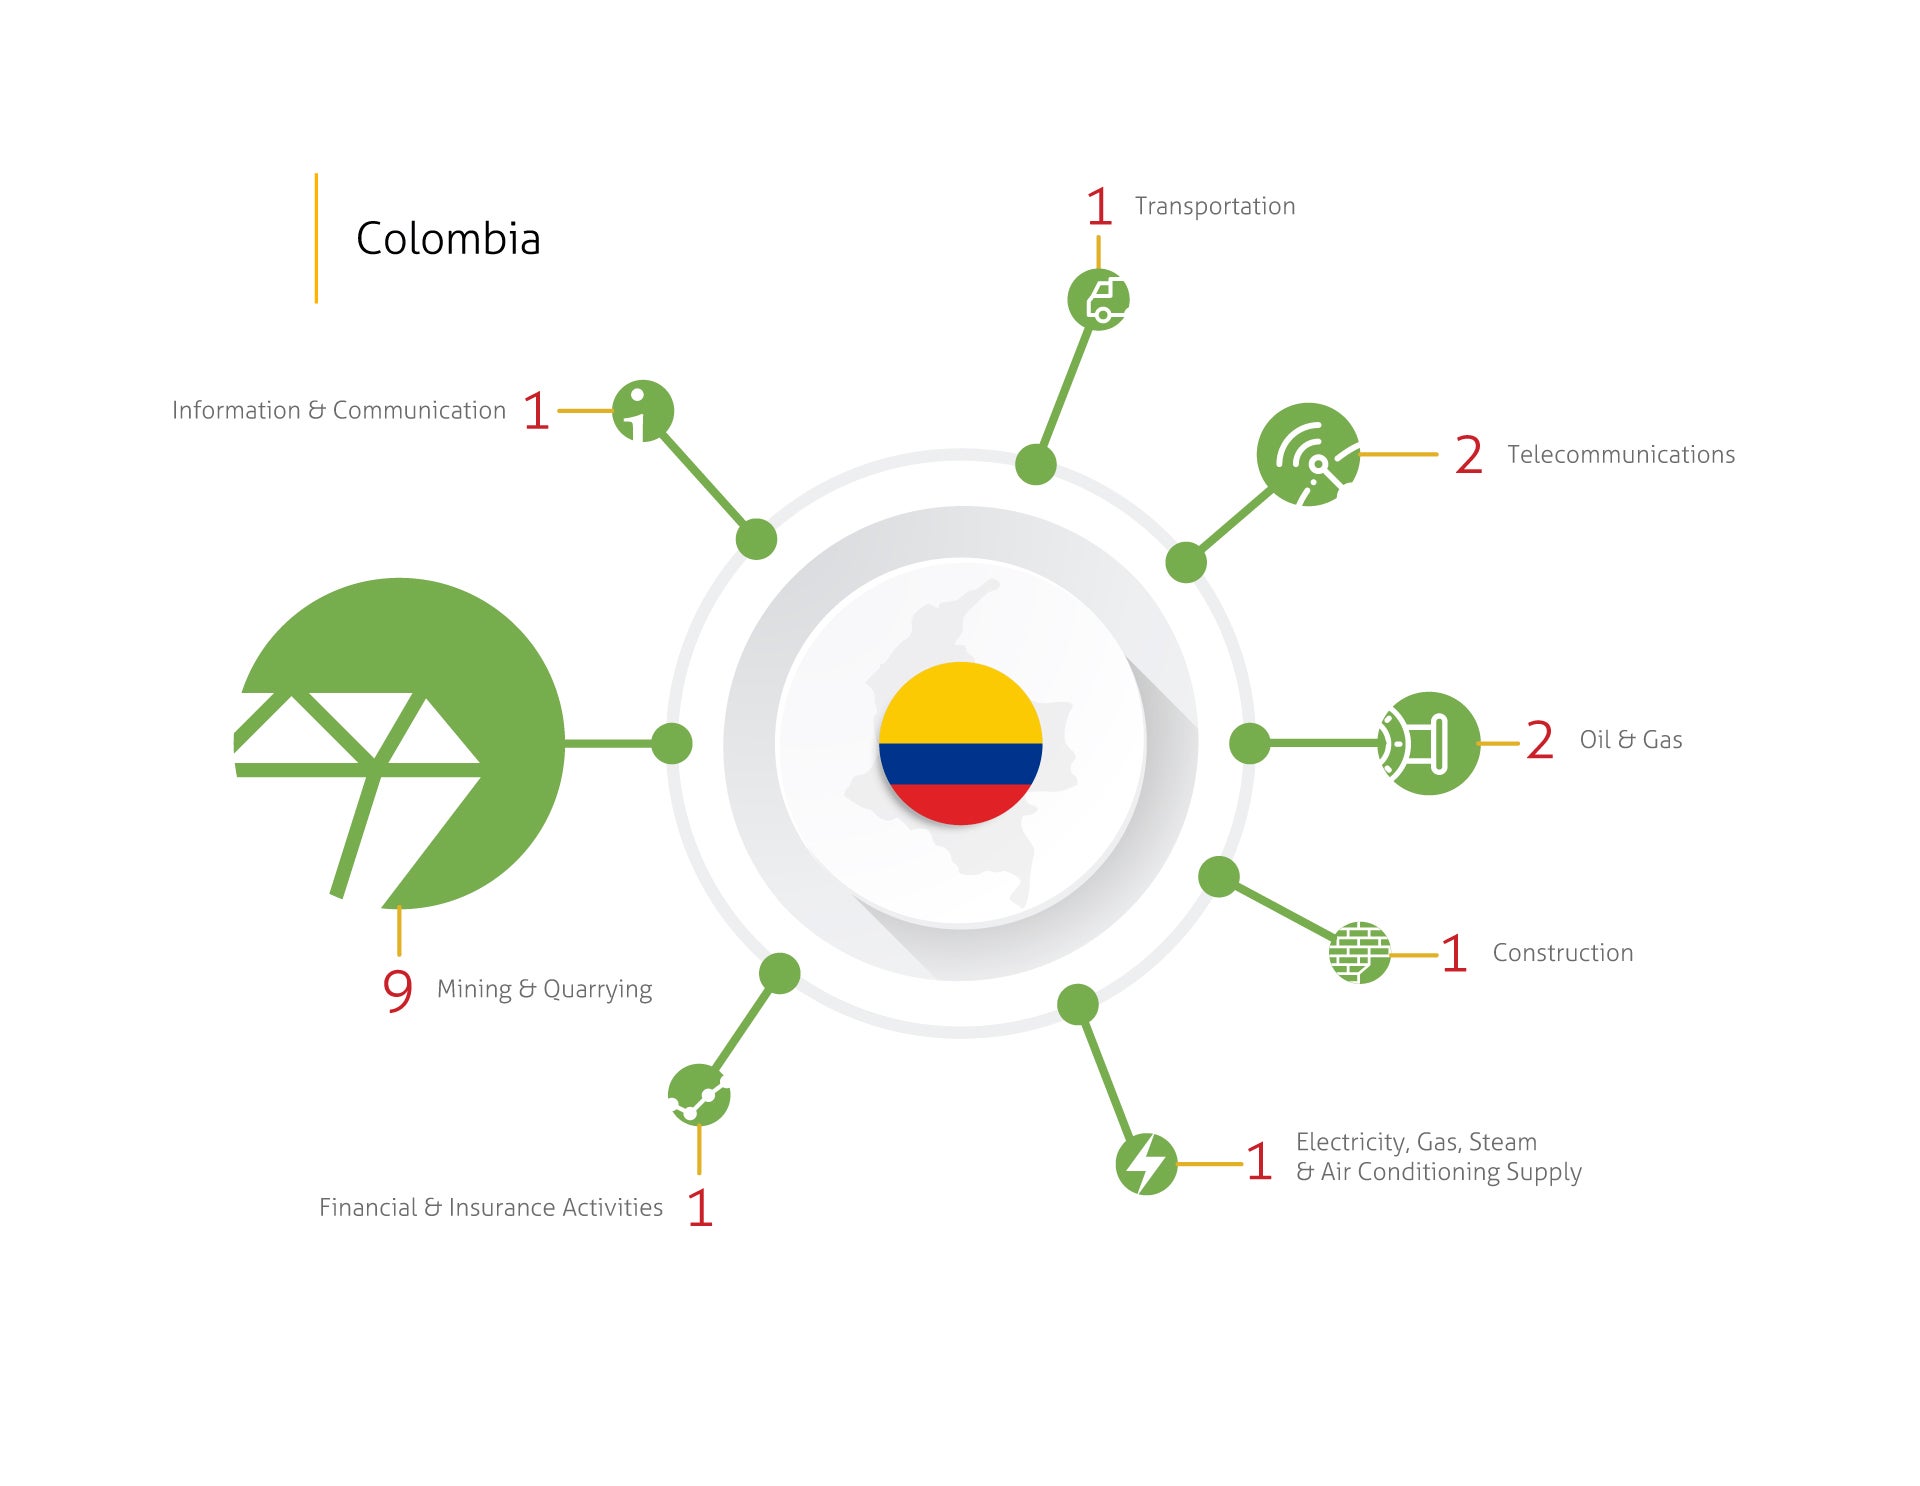 Industries involved in disputes - Colombia